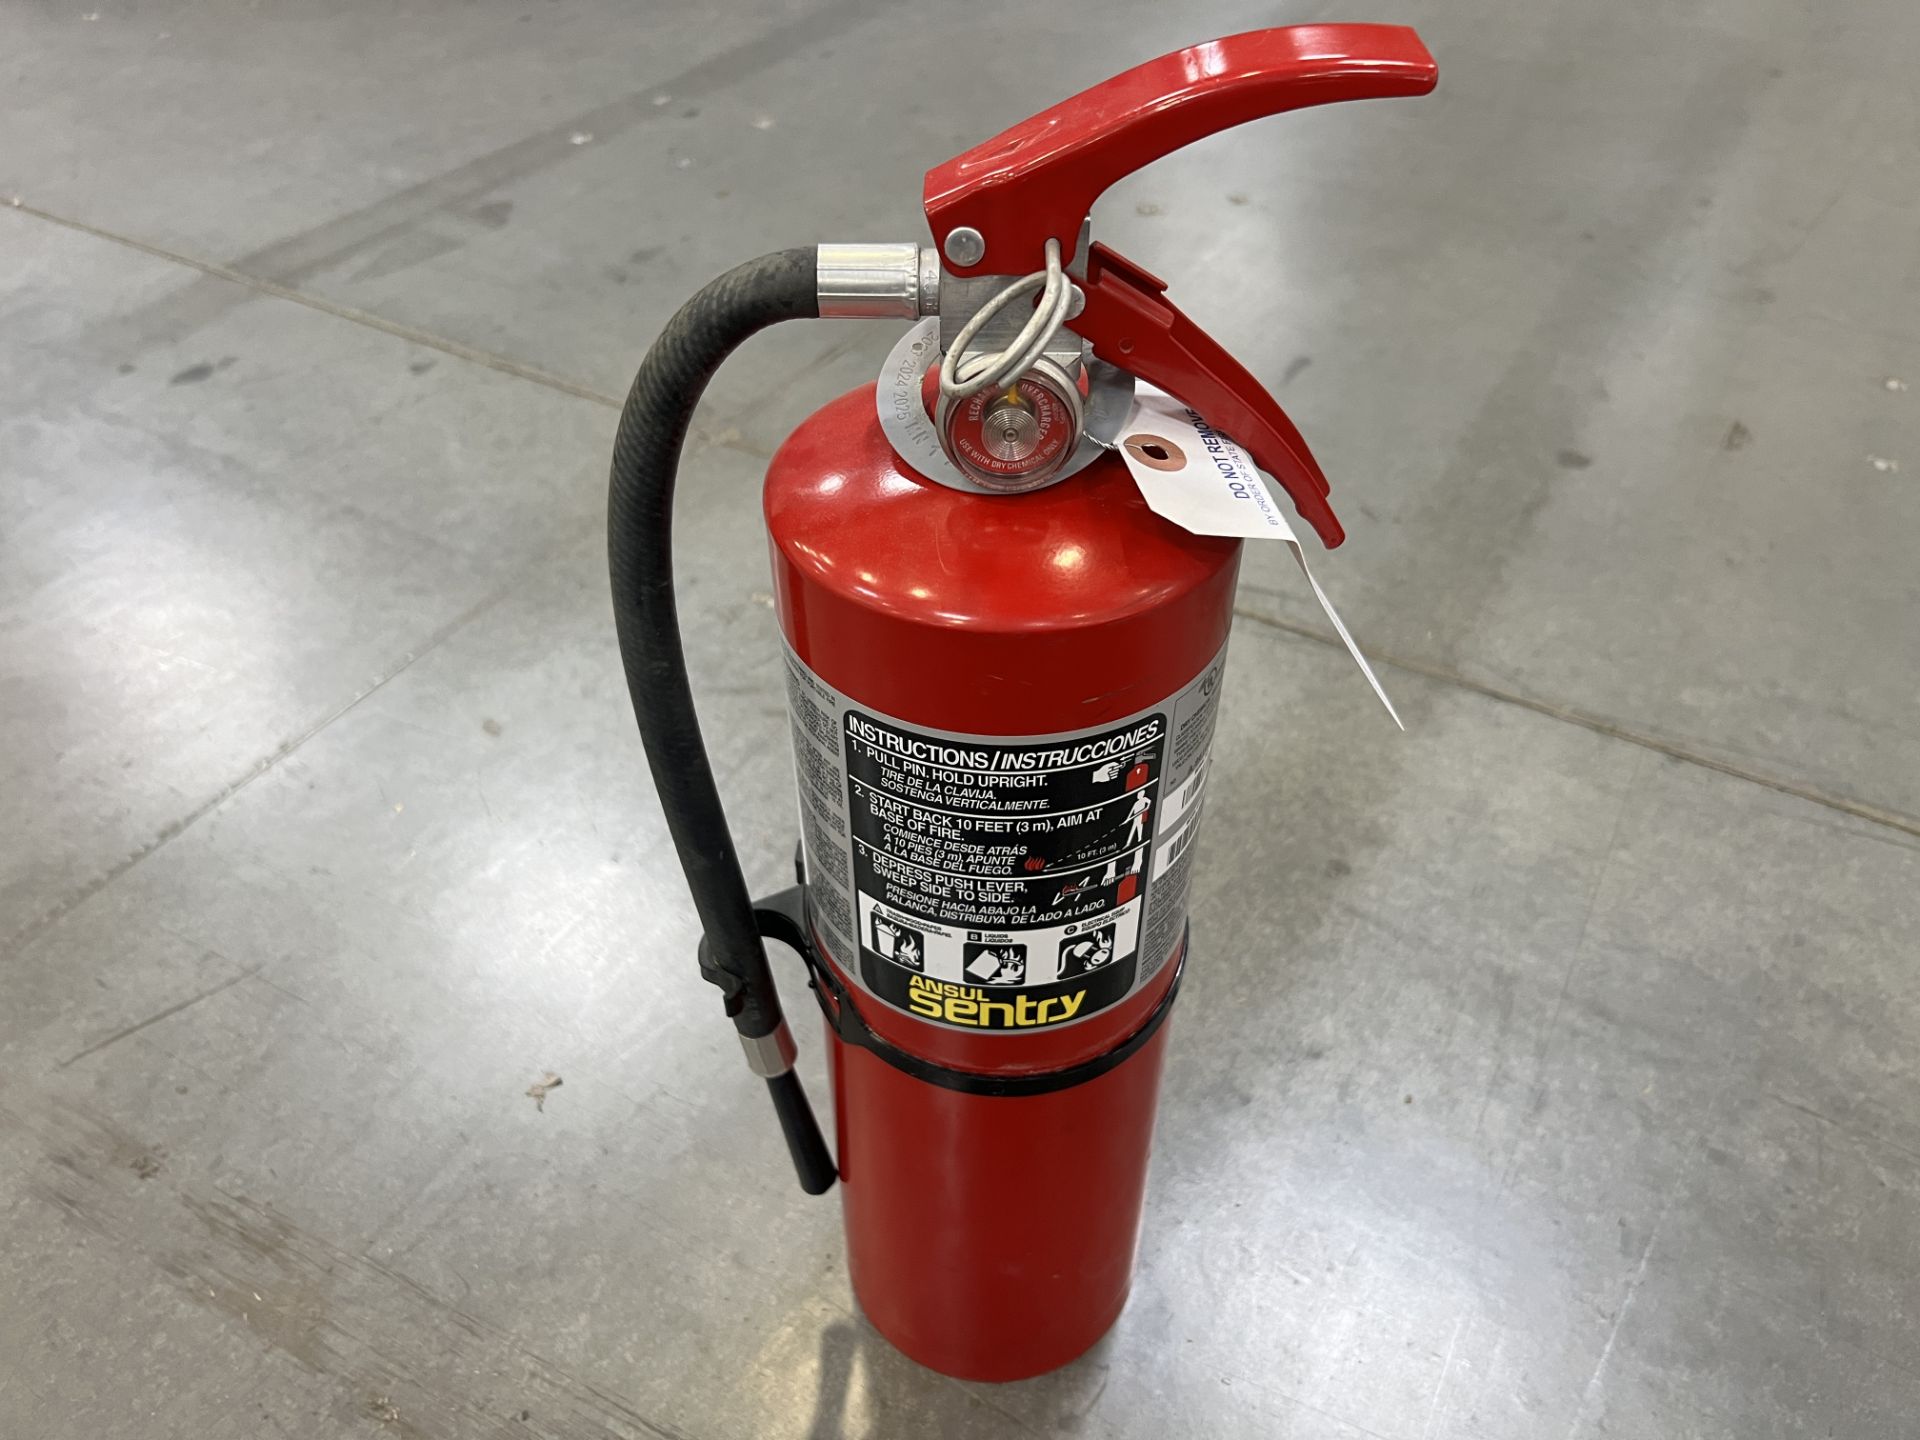 Ansel Sentry Fire Extinguisher - Image 3 of 3